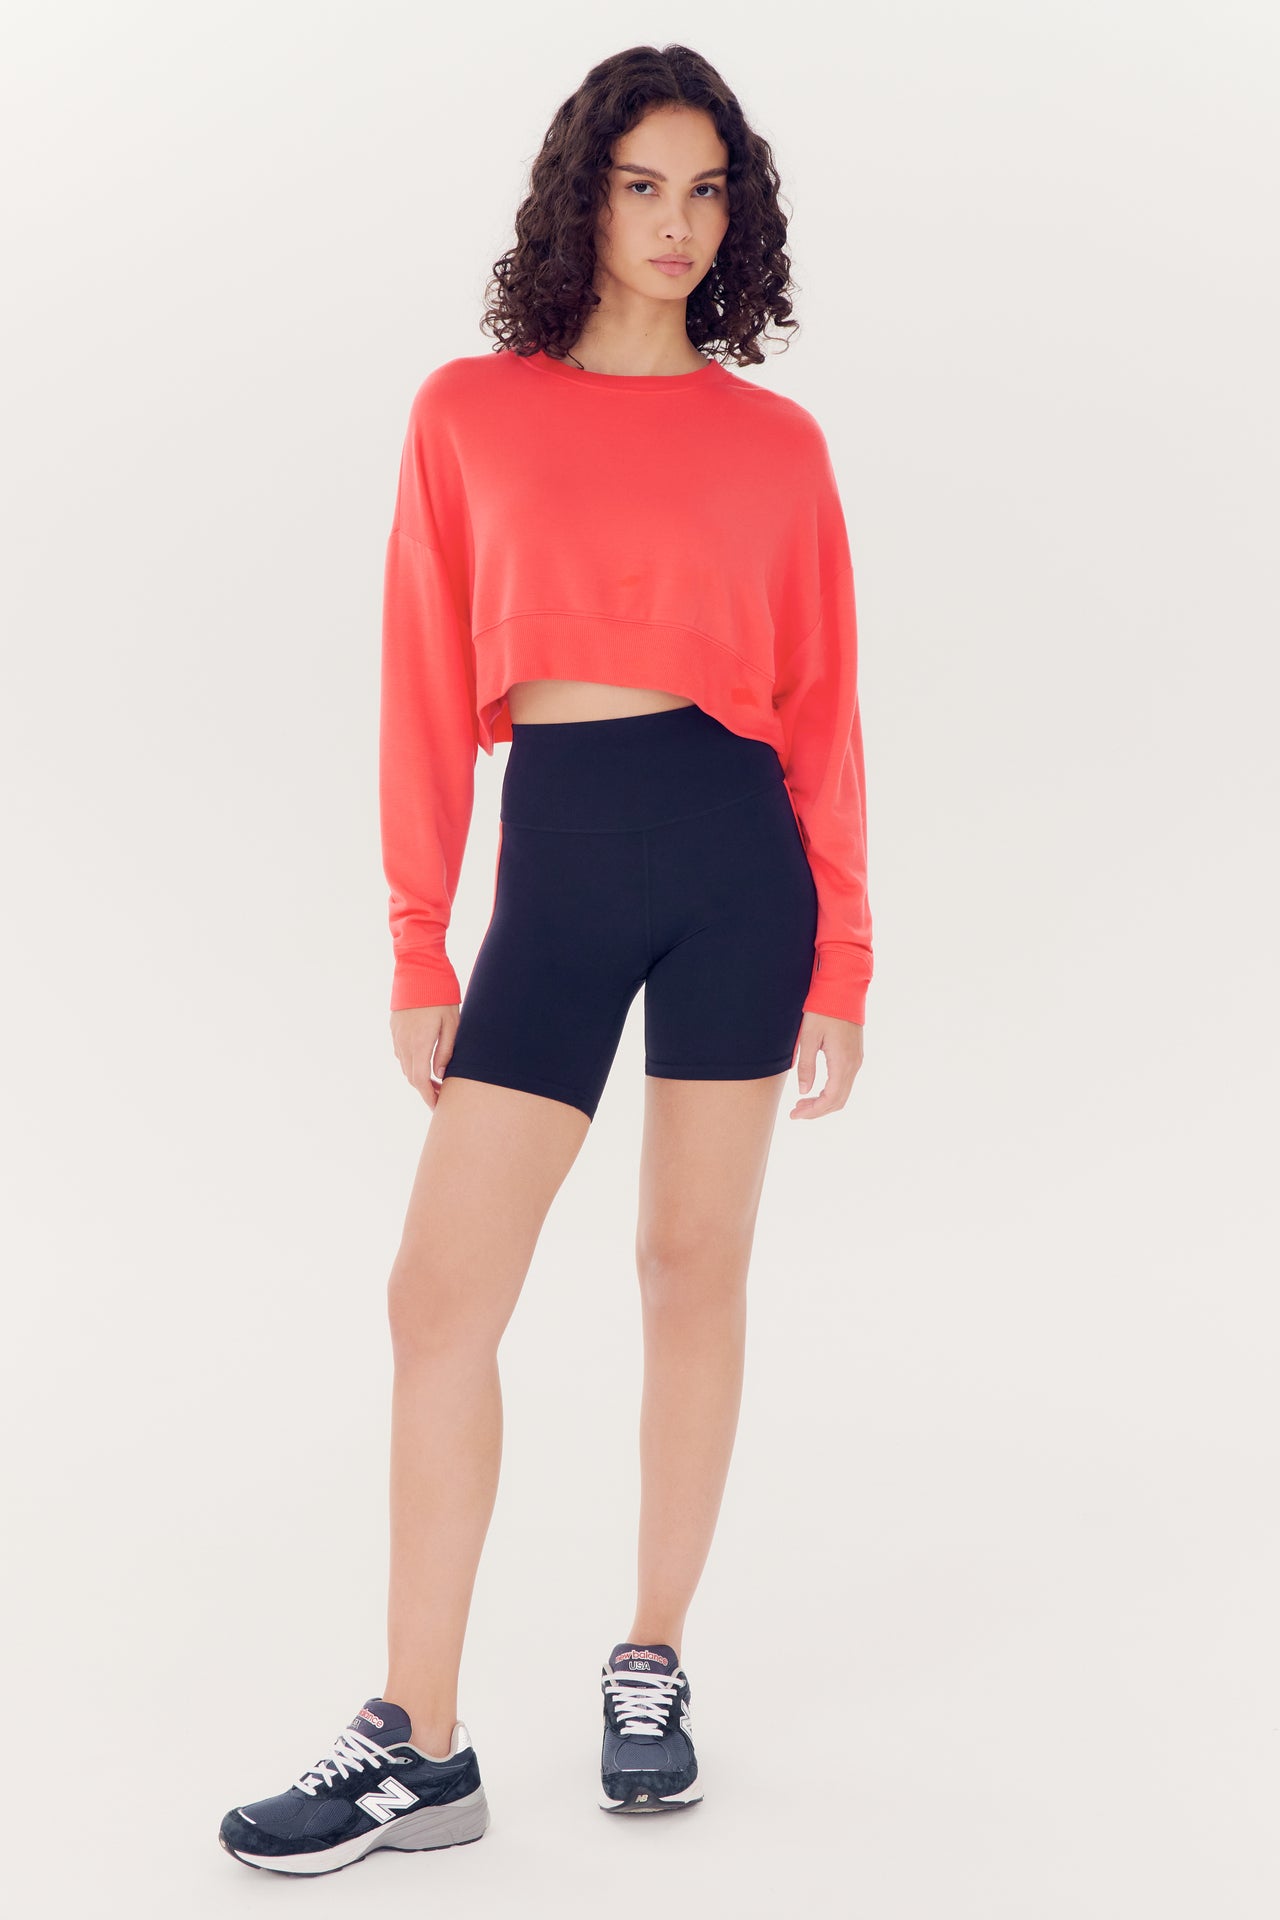 A woman stands posing against a white background, wearing a SPLITS59 Noah Fleece Crop Sweatshirt in Melon made of modal spandex blend, black shorts, and black athletic shoes.